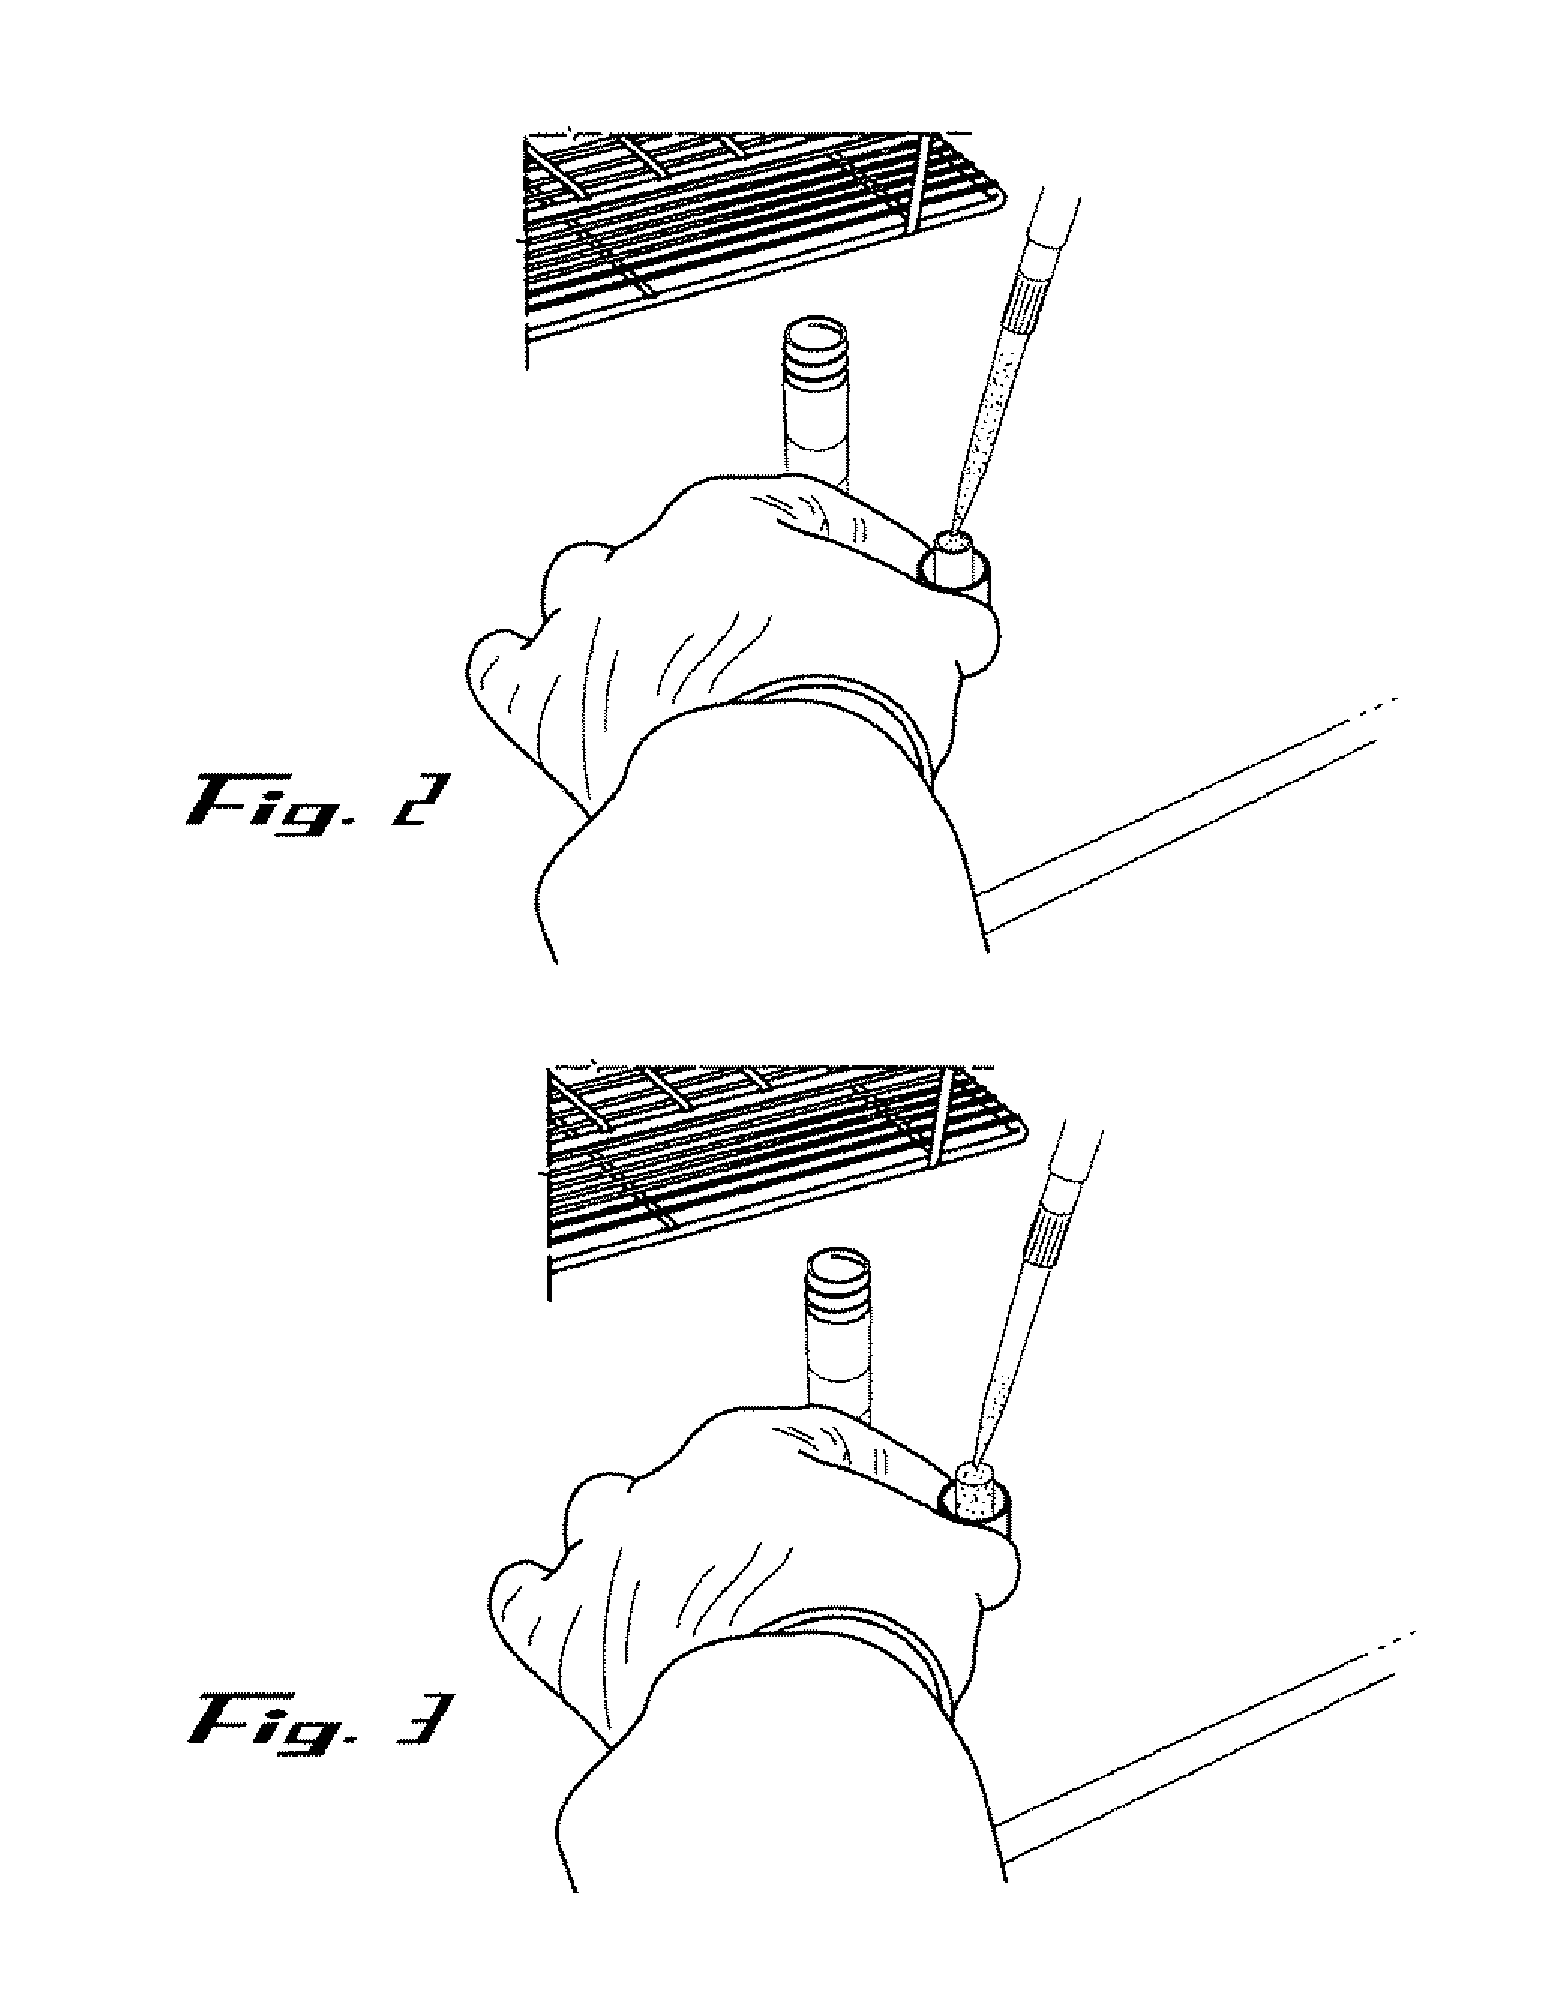 Devices and Methods for Collection, Storage and Transportation of Biological Specimens